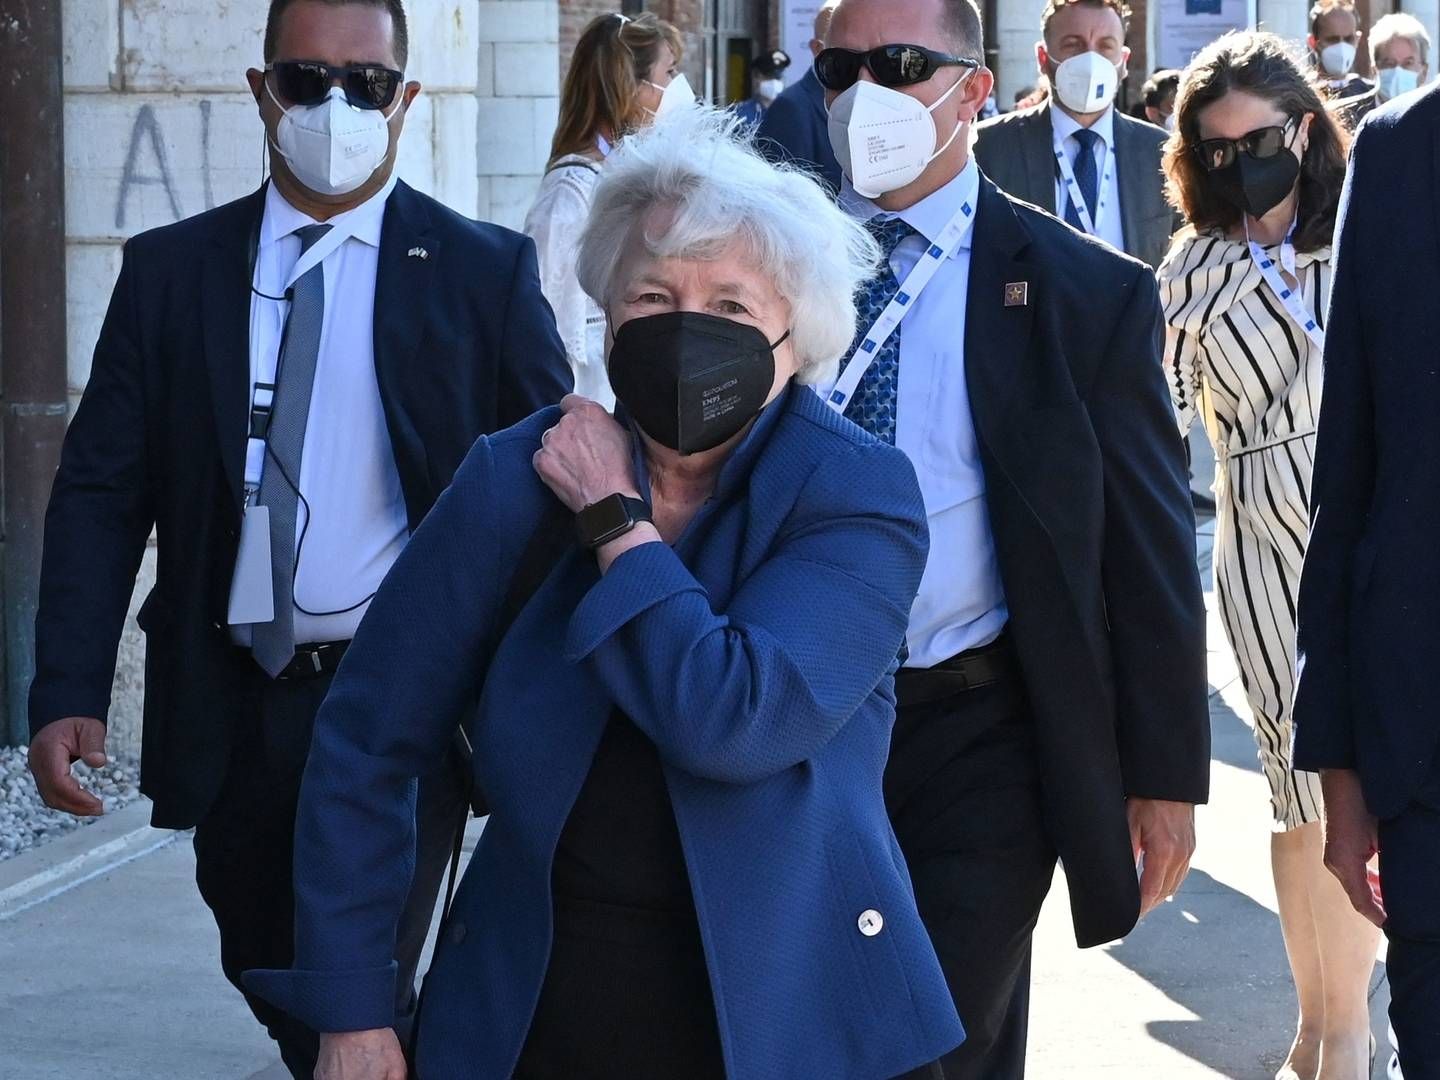 Janet Yellen at the finance ministers and central bankers meeting in Venice, Italy, 2021. | Photo: Andreas Solaro/AFP / AFP